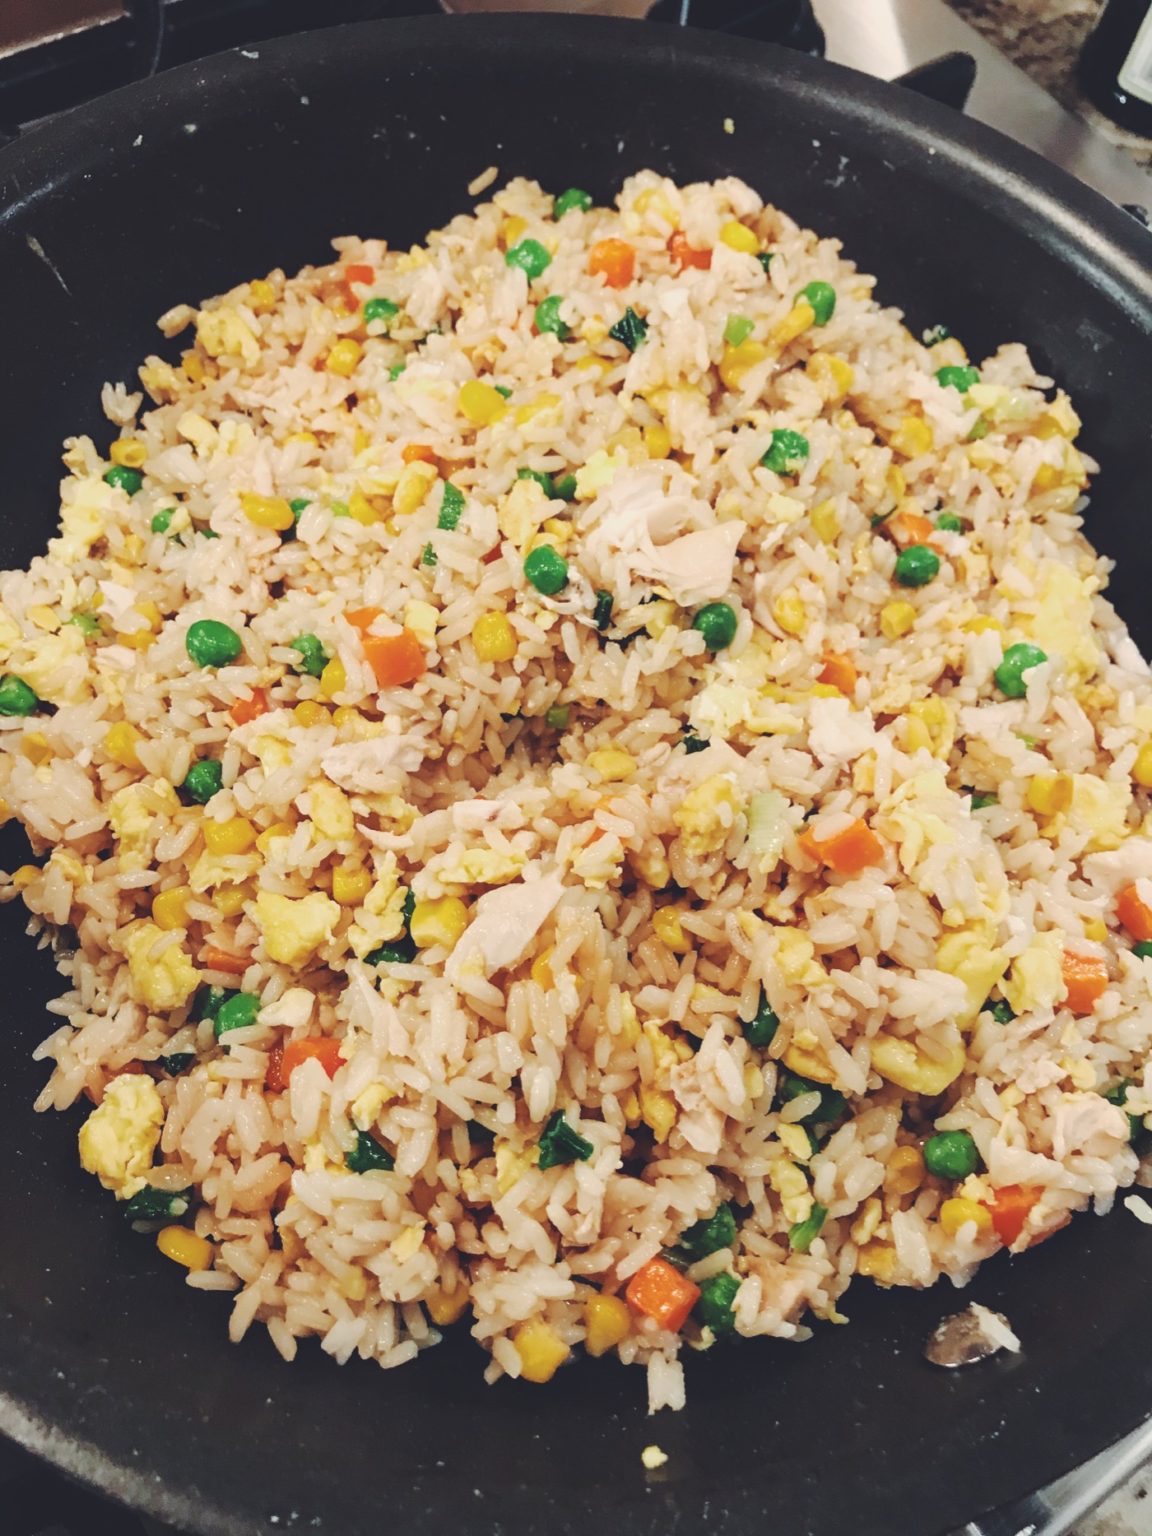 expository essay on how to cook fried rice